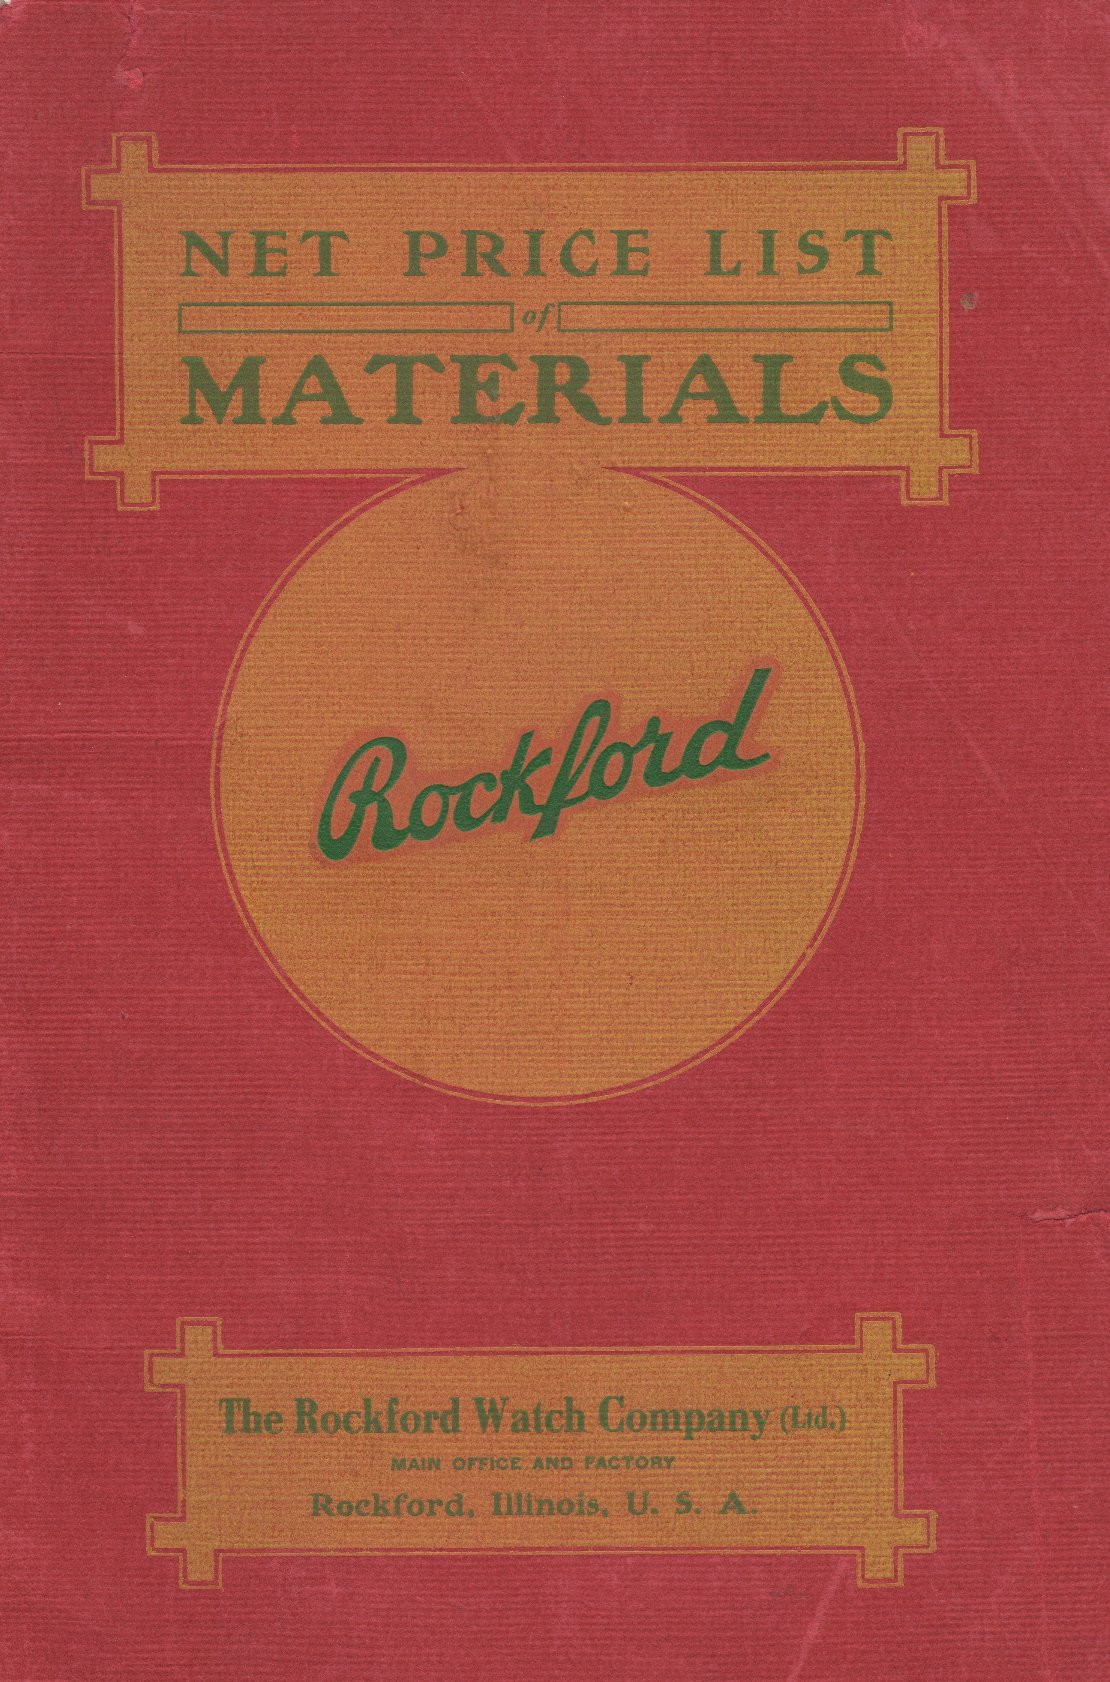 The Rockford Watch Company Net Price List of Materials (1907) Cover Image